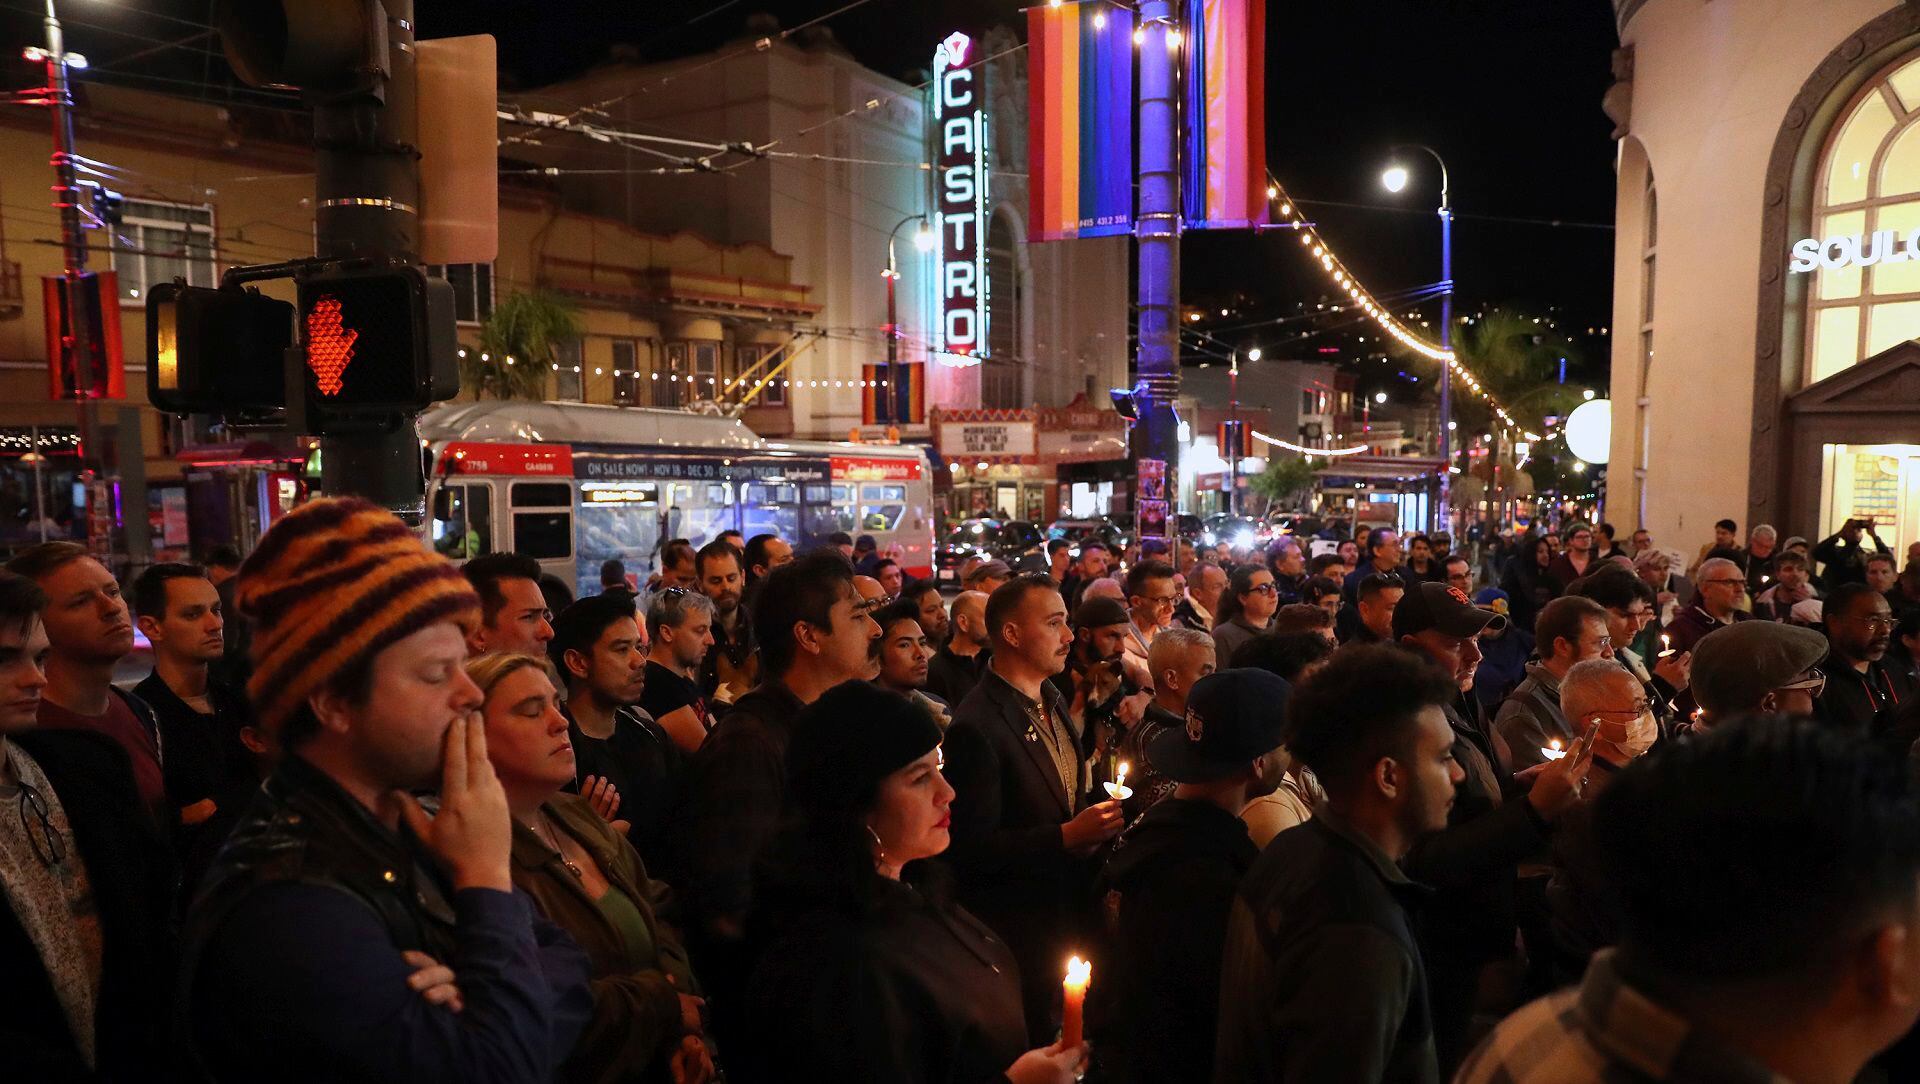 In the wake of the Club Q mass shooting in Colorado, hundreds of members of the LGBTQ community and their supporters gather during a candlelight vigil at Harvey Milk Plaza in San Francisco, late Sunday, Nov. 20, 2022. (Scott Strazzante/San Francisco Chronicle via AP)